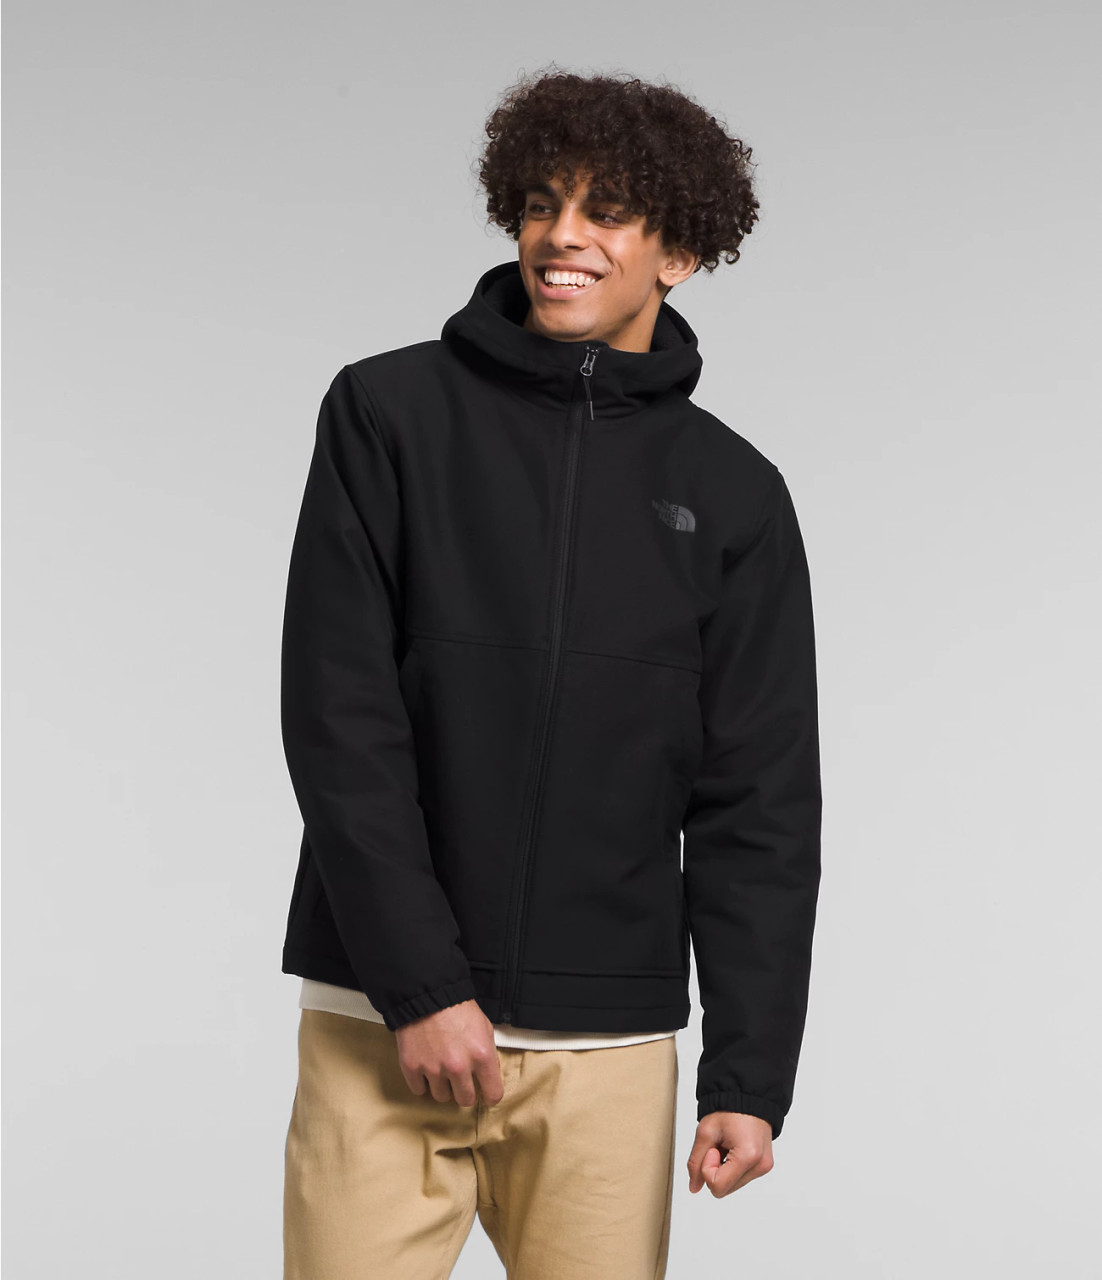  THE NORTH FACE Men's Camden Thermal Hoodie (Big and Standard  Size), Khaki Stone Dark Heather, Medium : Clothing, Shoes & Jewelry